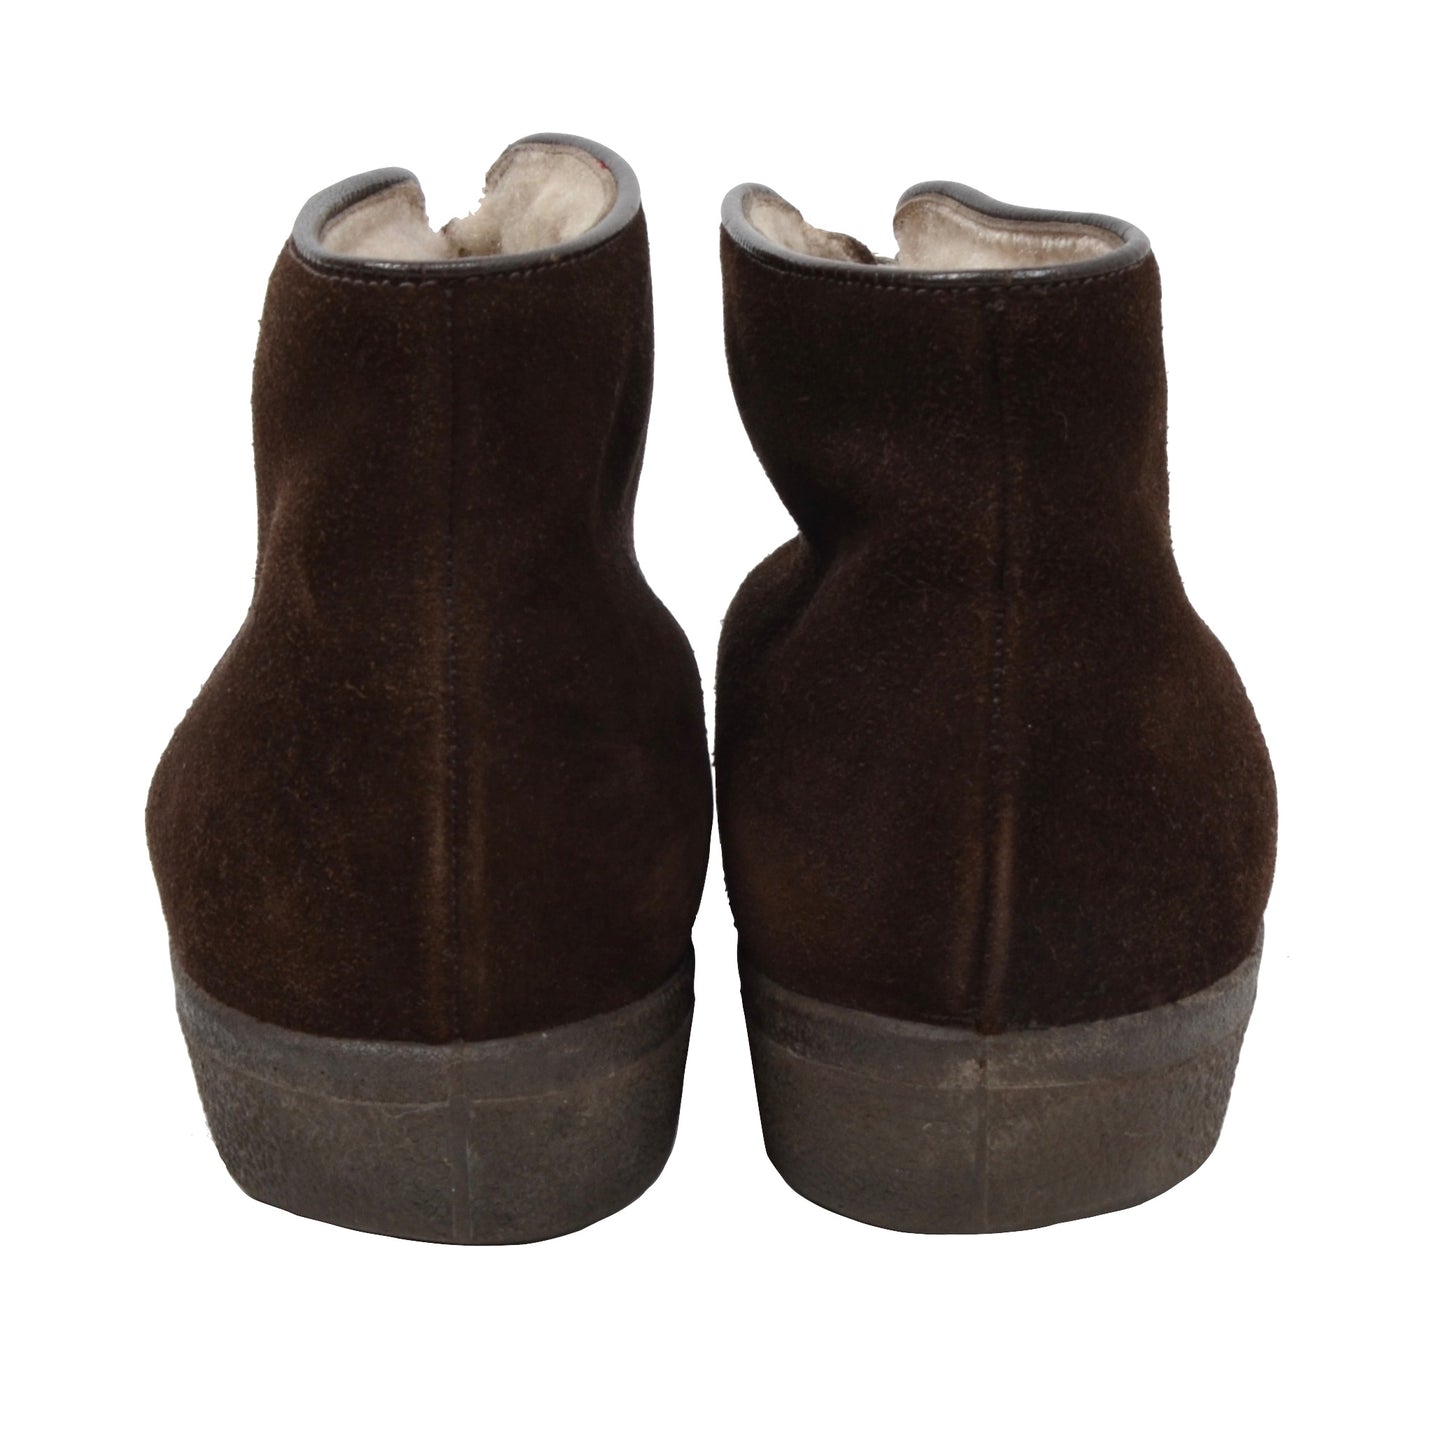 Morlands Shearling-Lined Suede Boots Size 8 - Brown